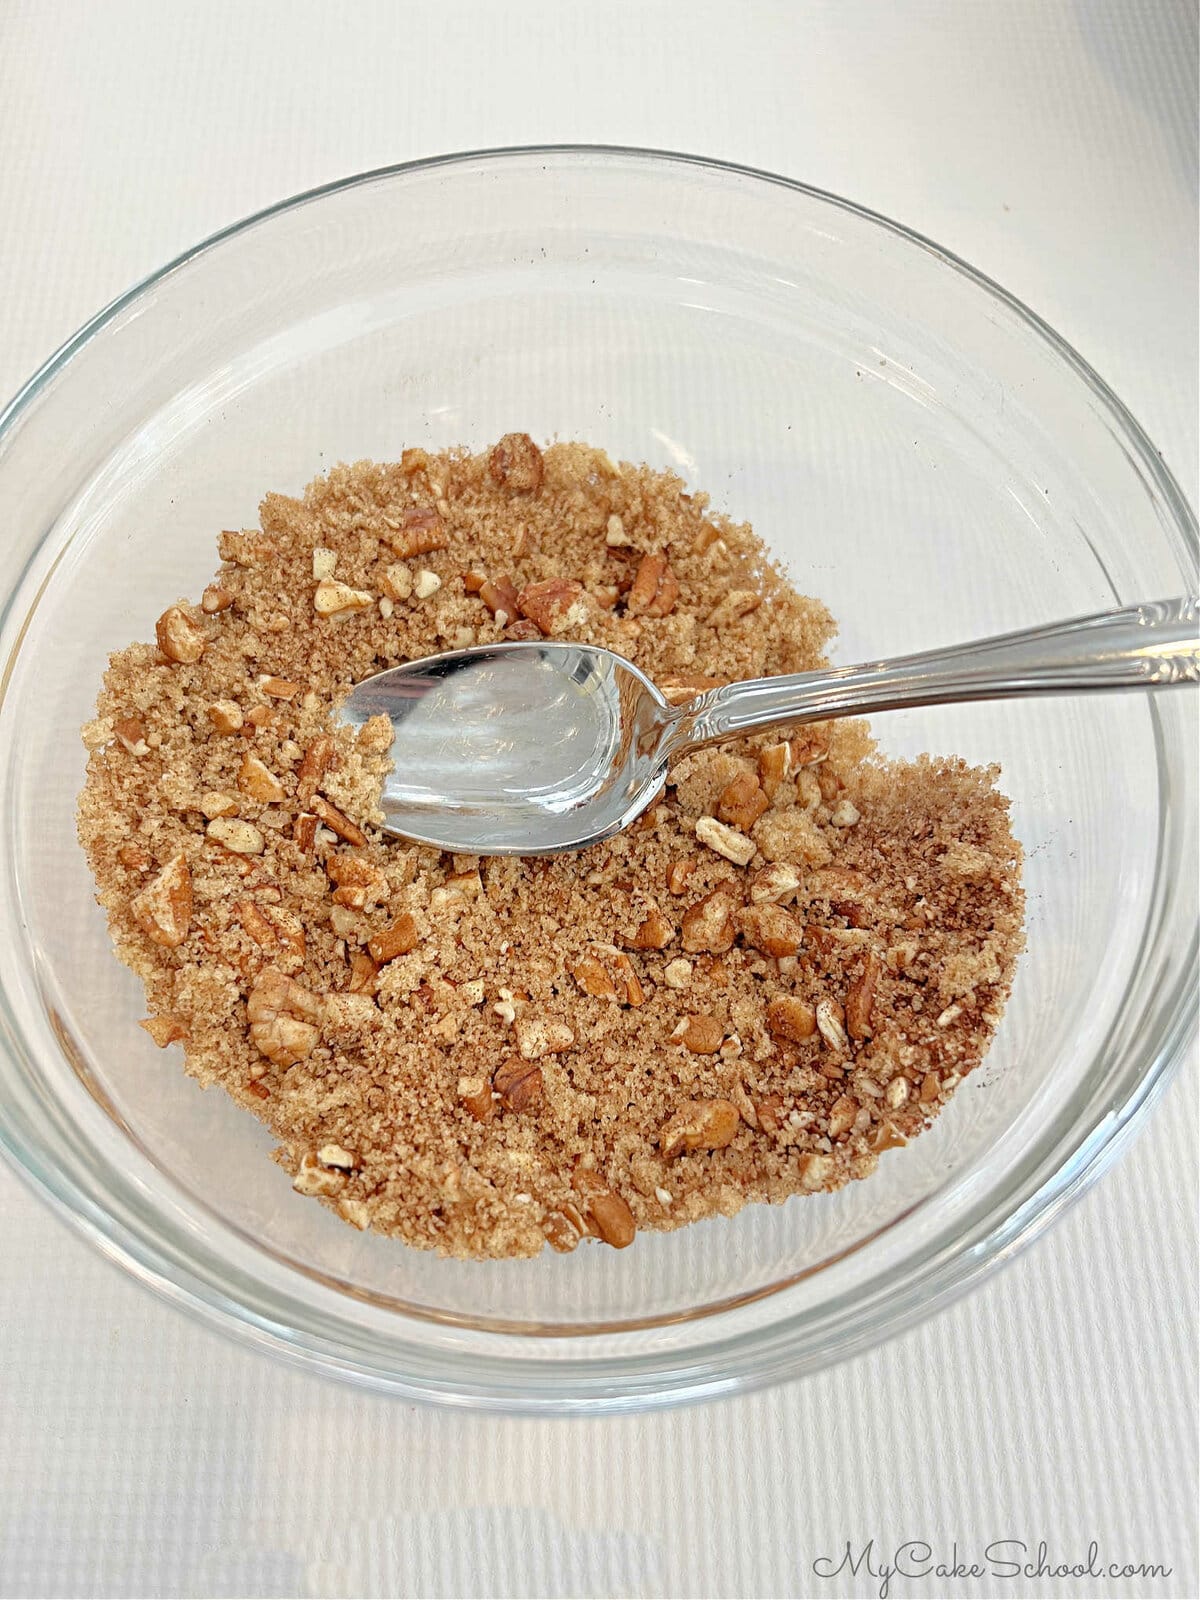 Glass bowl filled with cinnamon, brown sugar, and pecan mixture along with a spoon